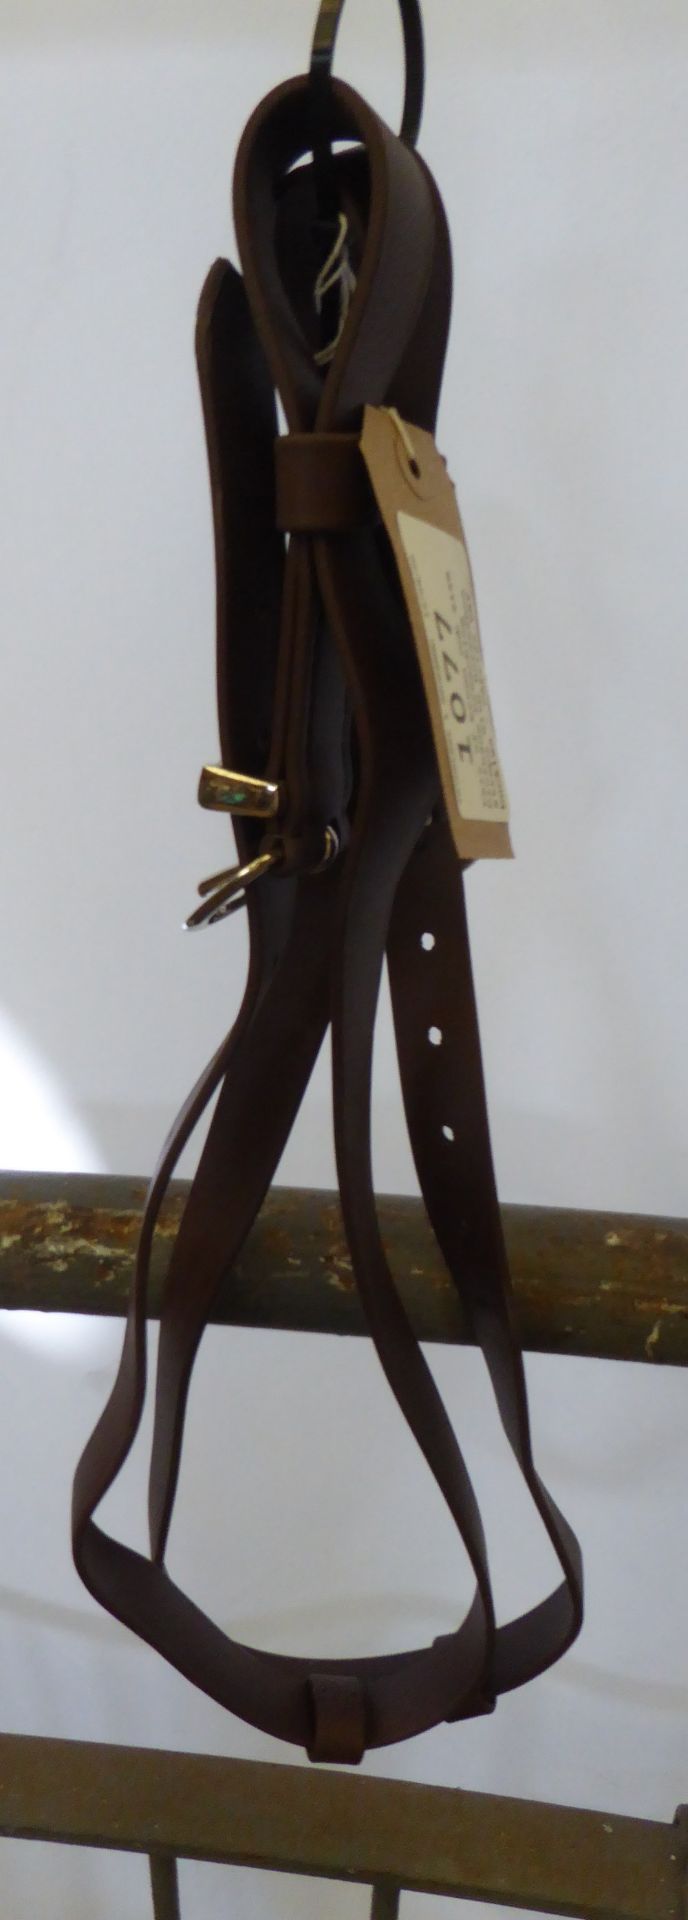 Pair of brown cob size biothane breeching straps with horseshoe buckles - carries VAT